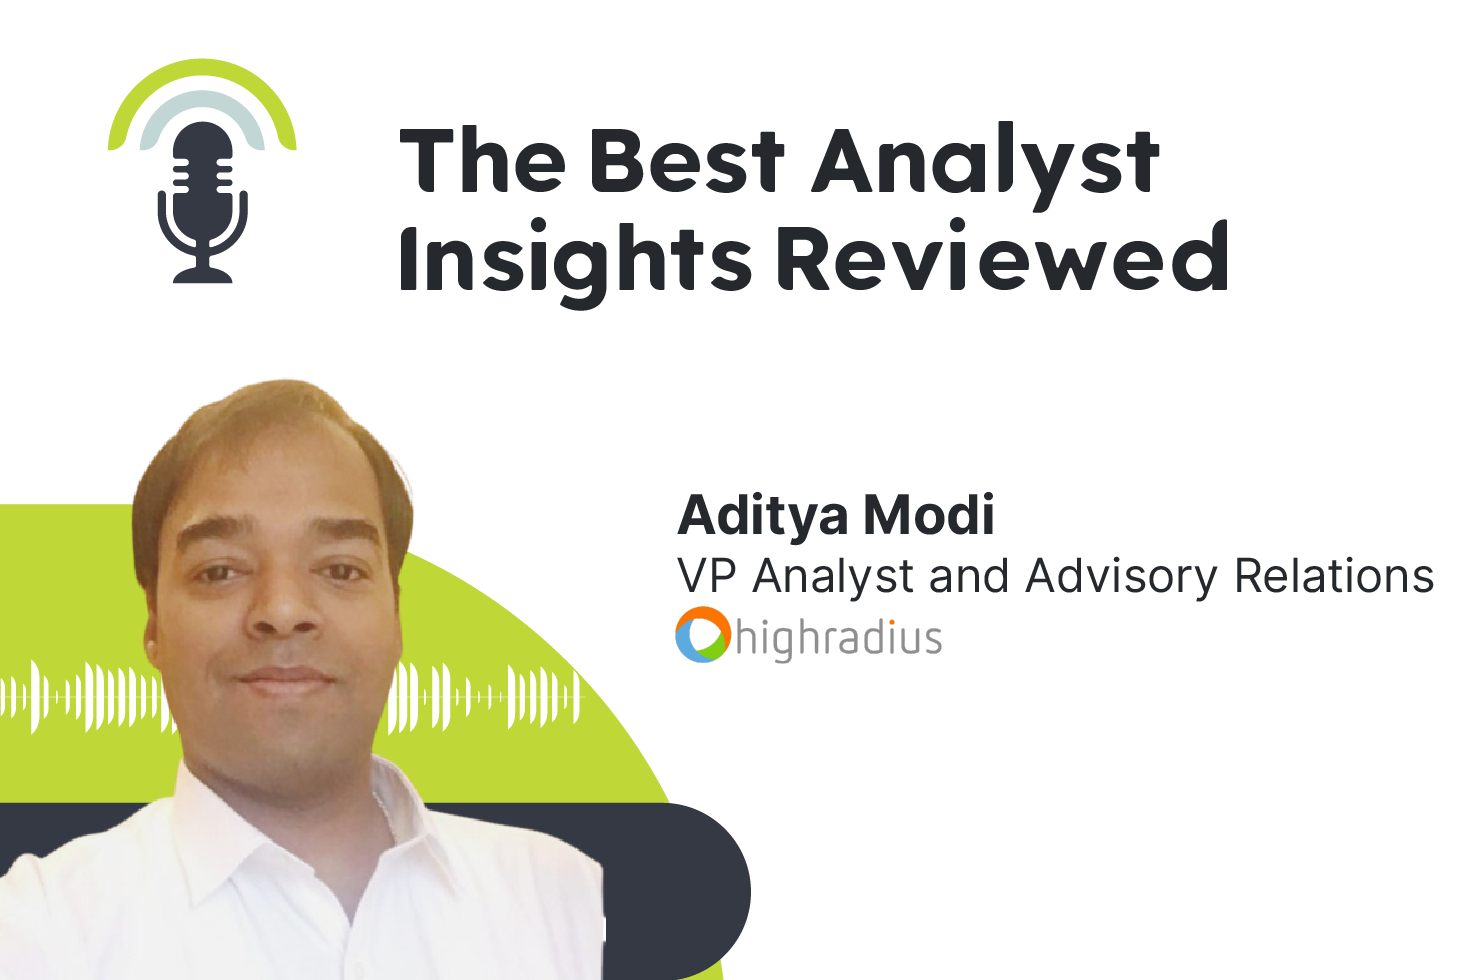 The Best Analyst Insights Reviewed